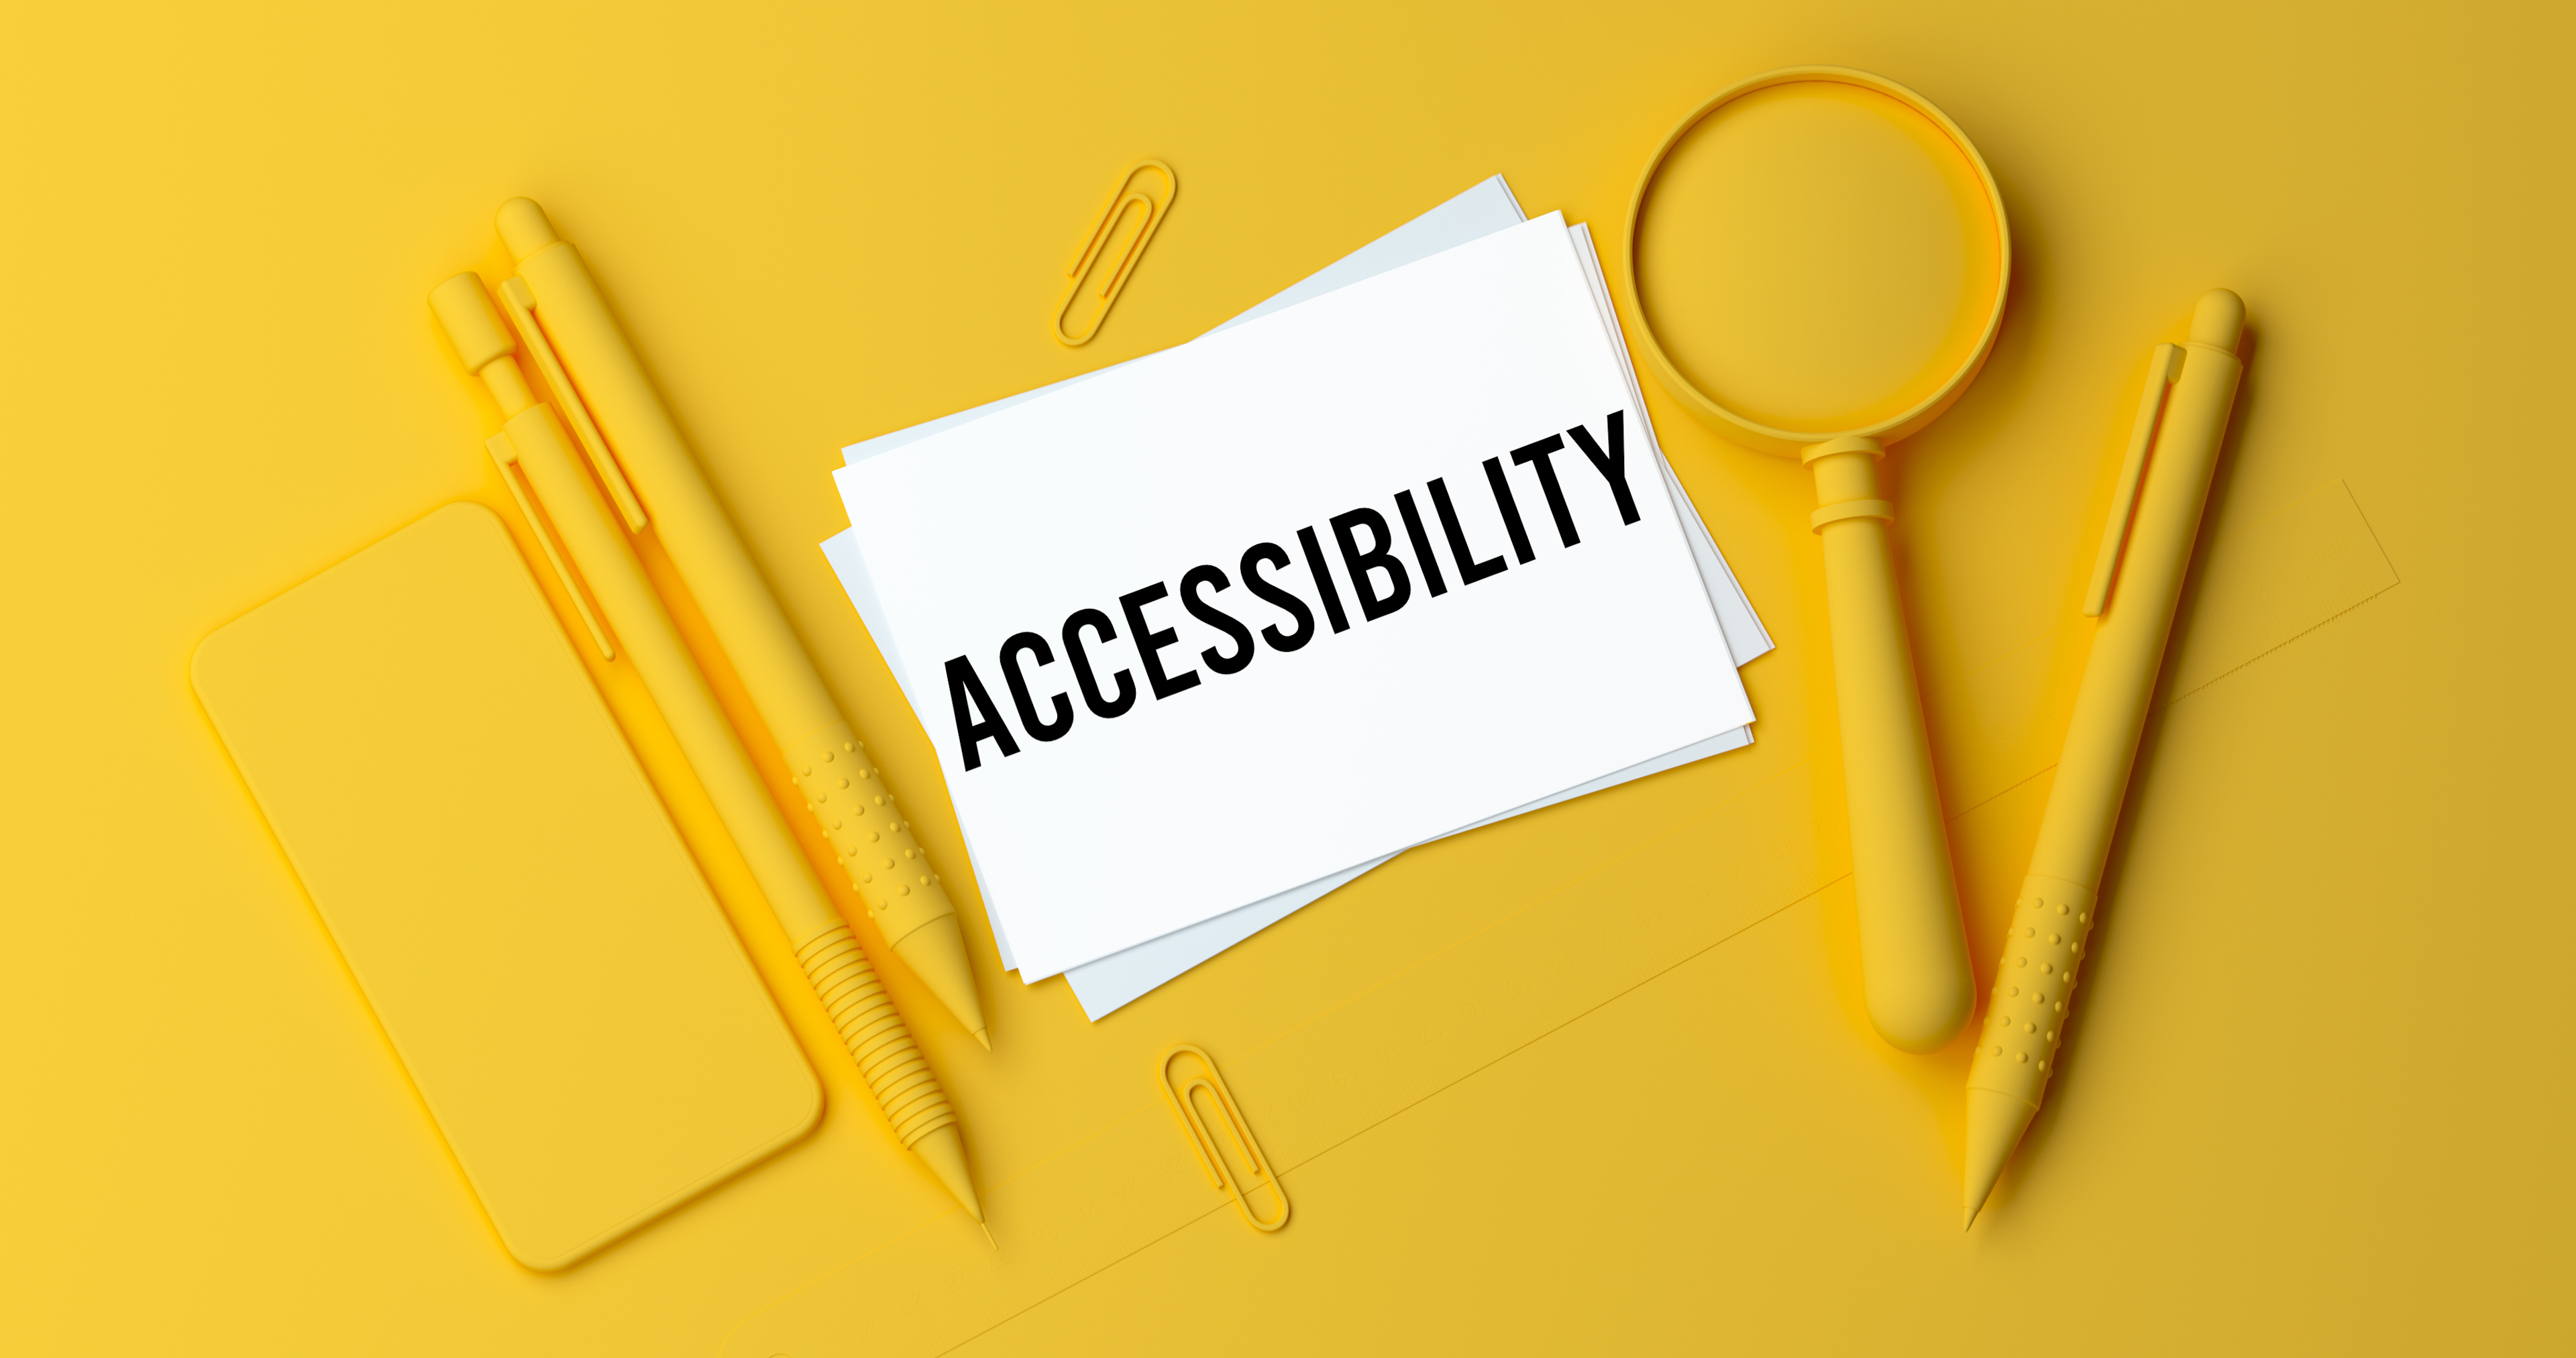 The word 'accessibility' on a piece of paper